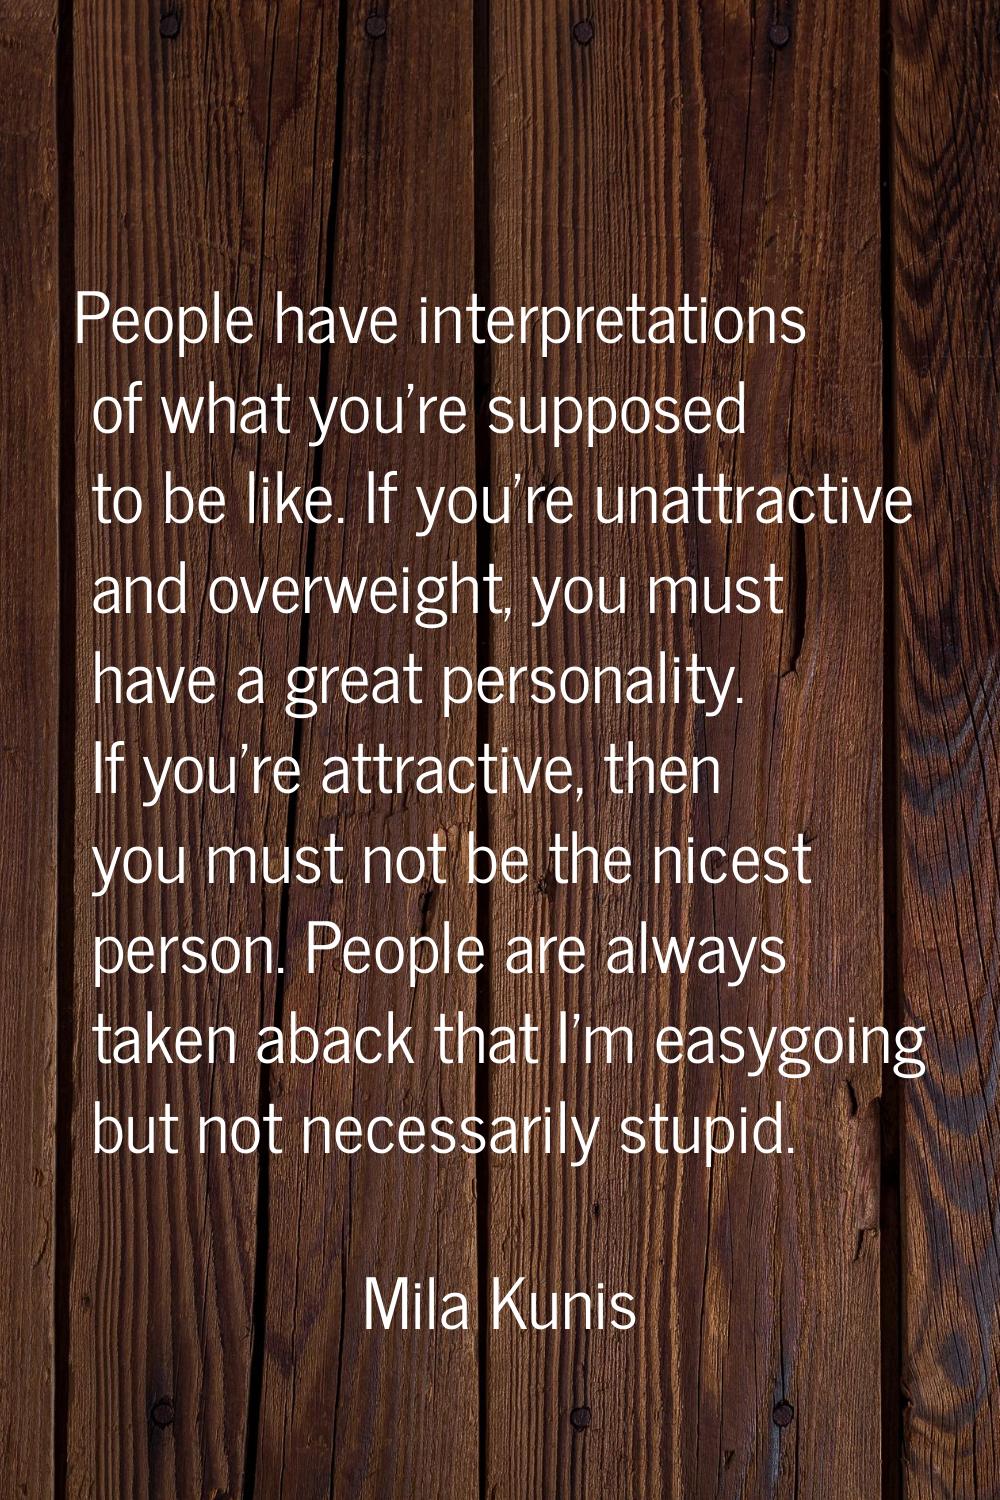 People have interpretations of what you're supposed to be like. If you're unattractive and overweig